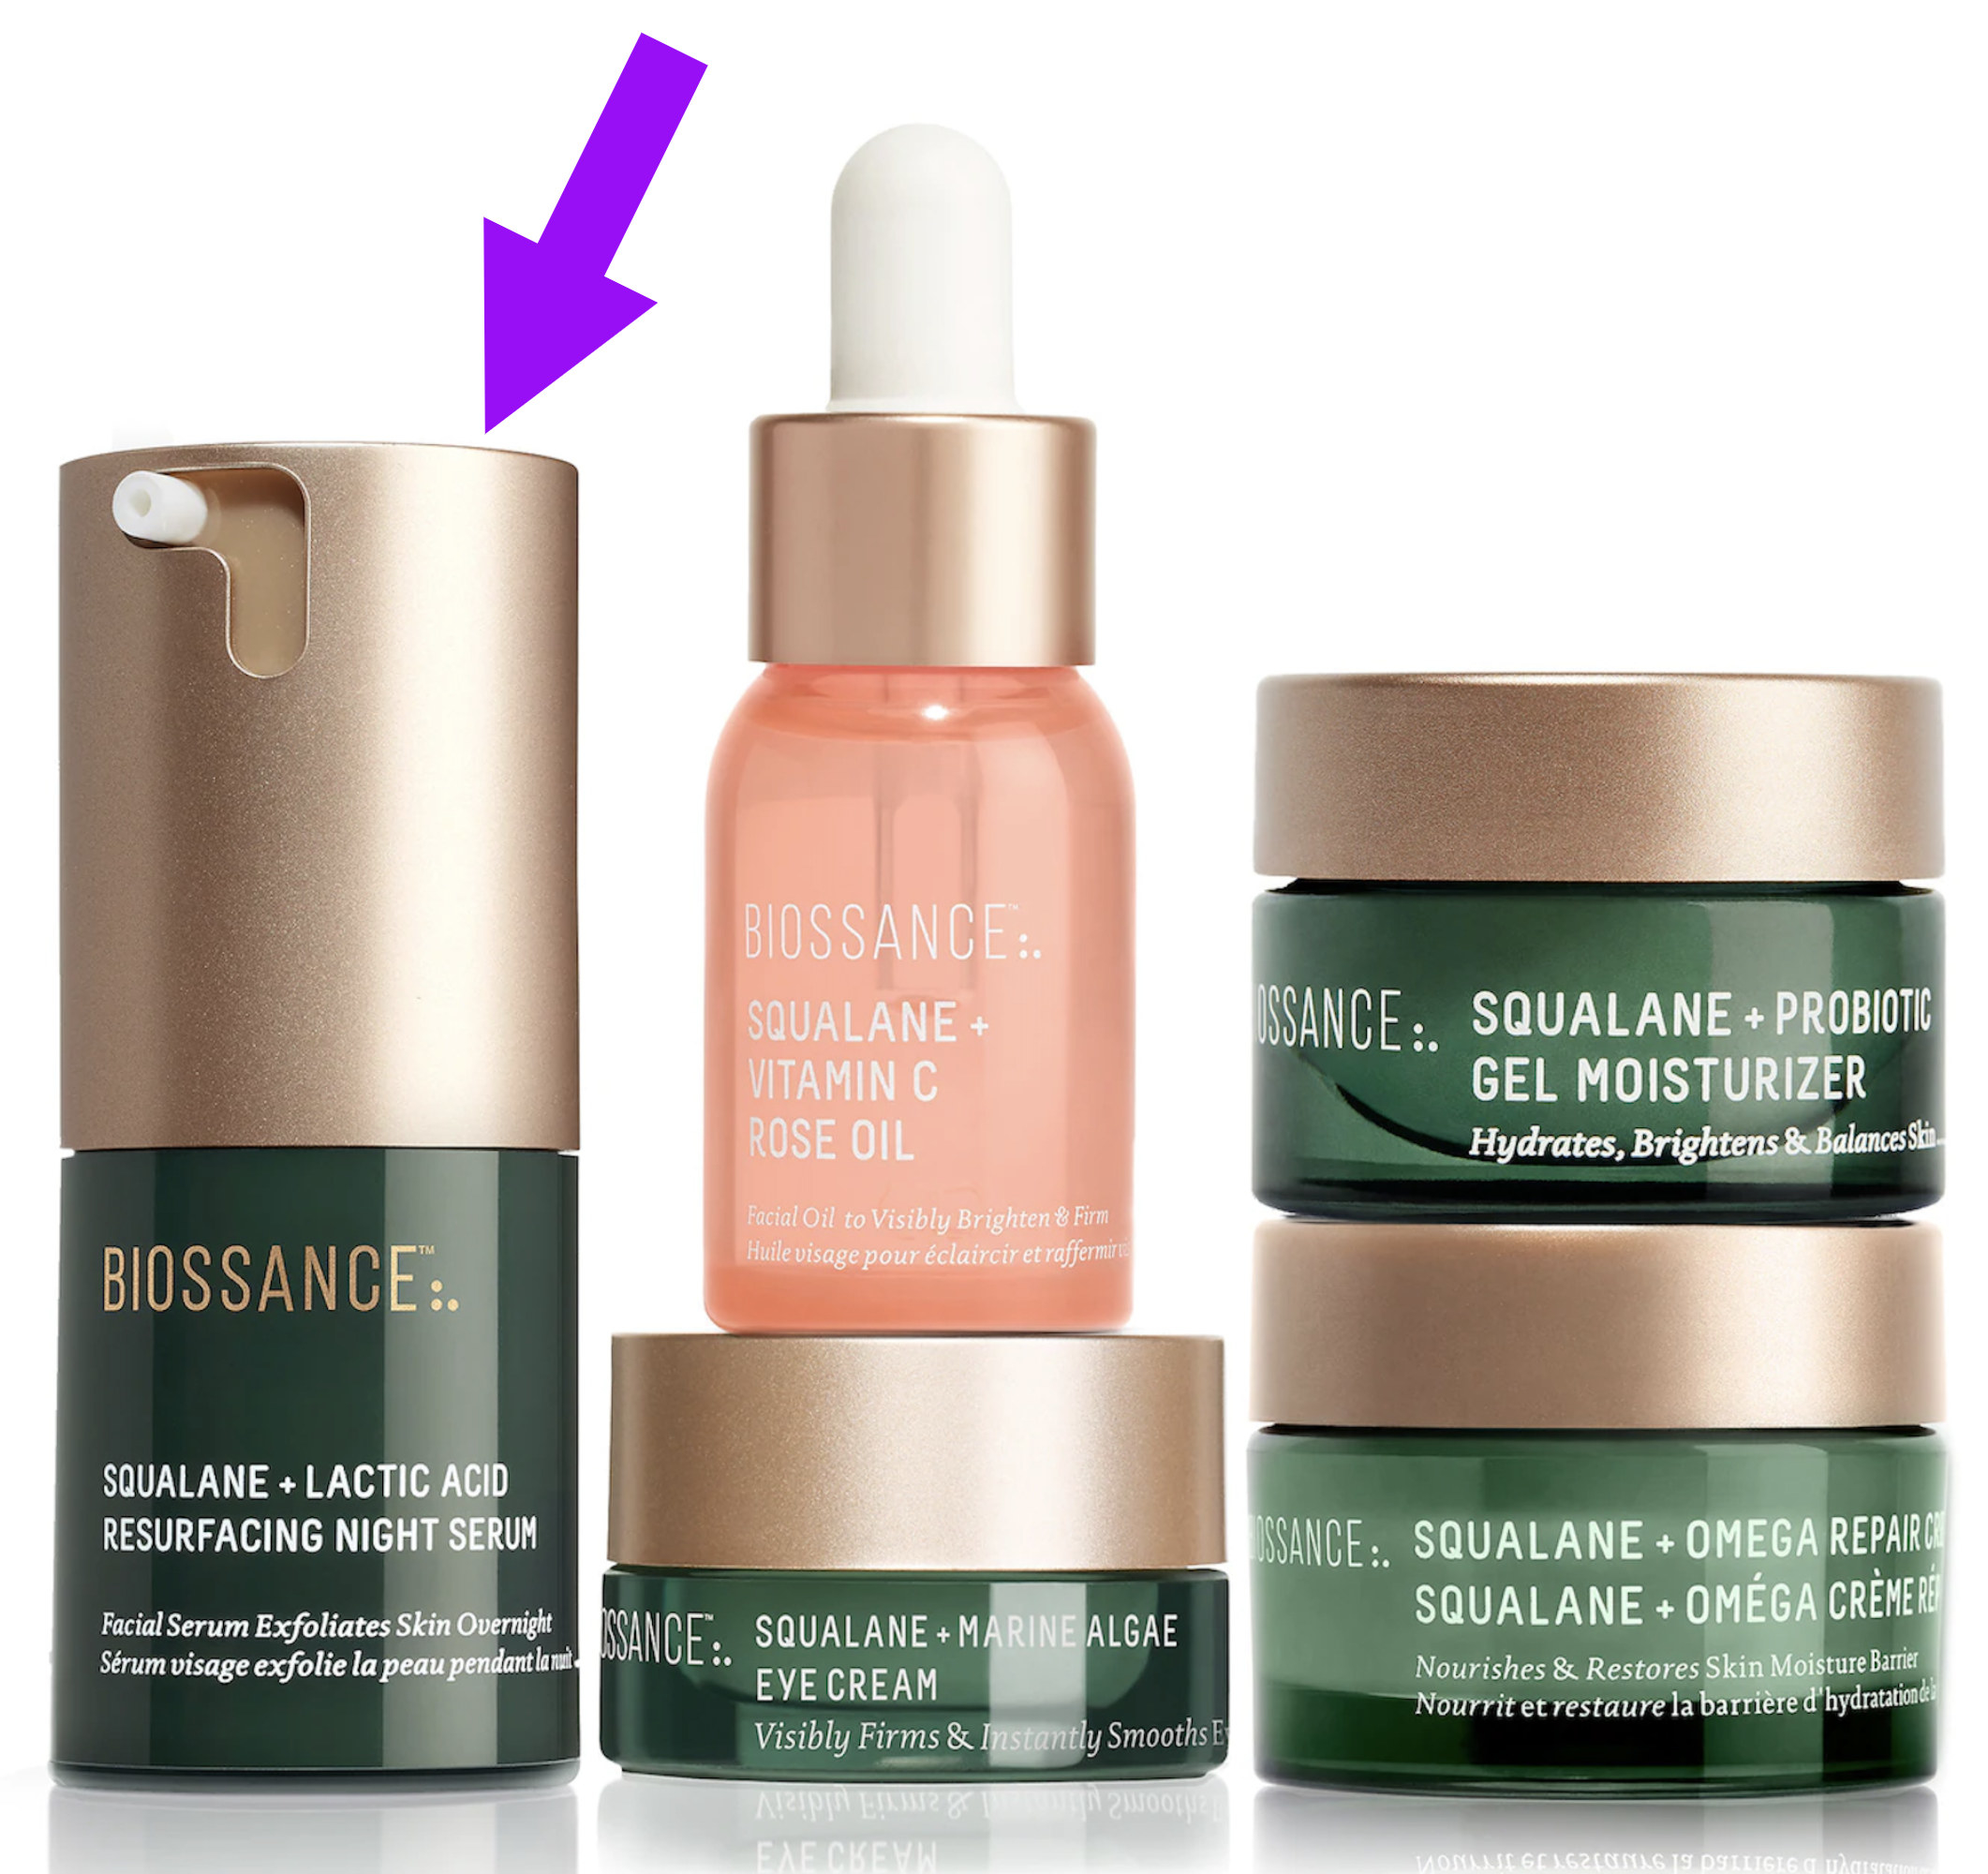 Several Biossance products